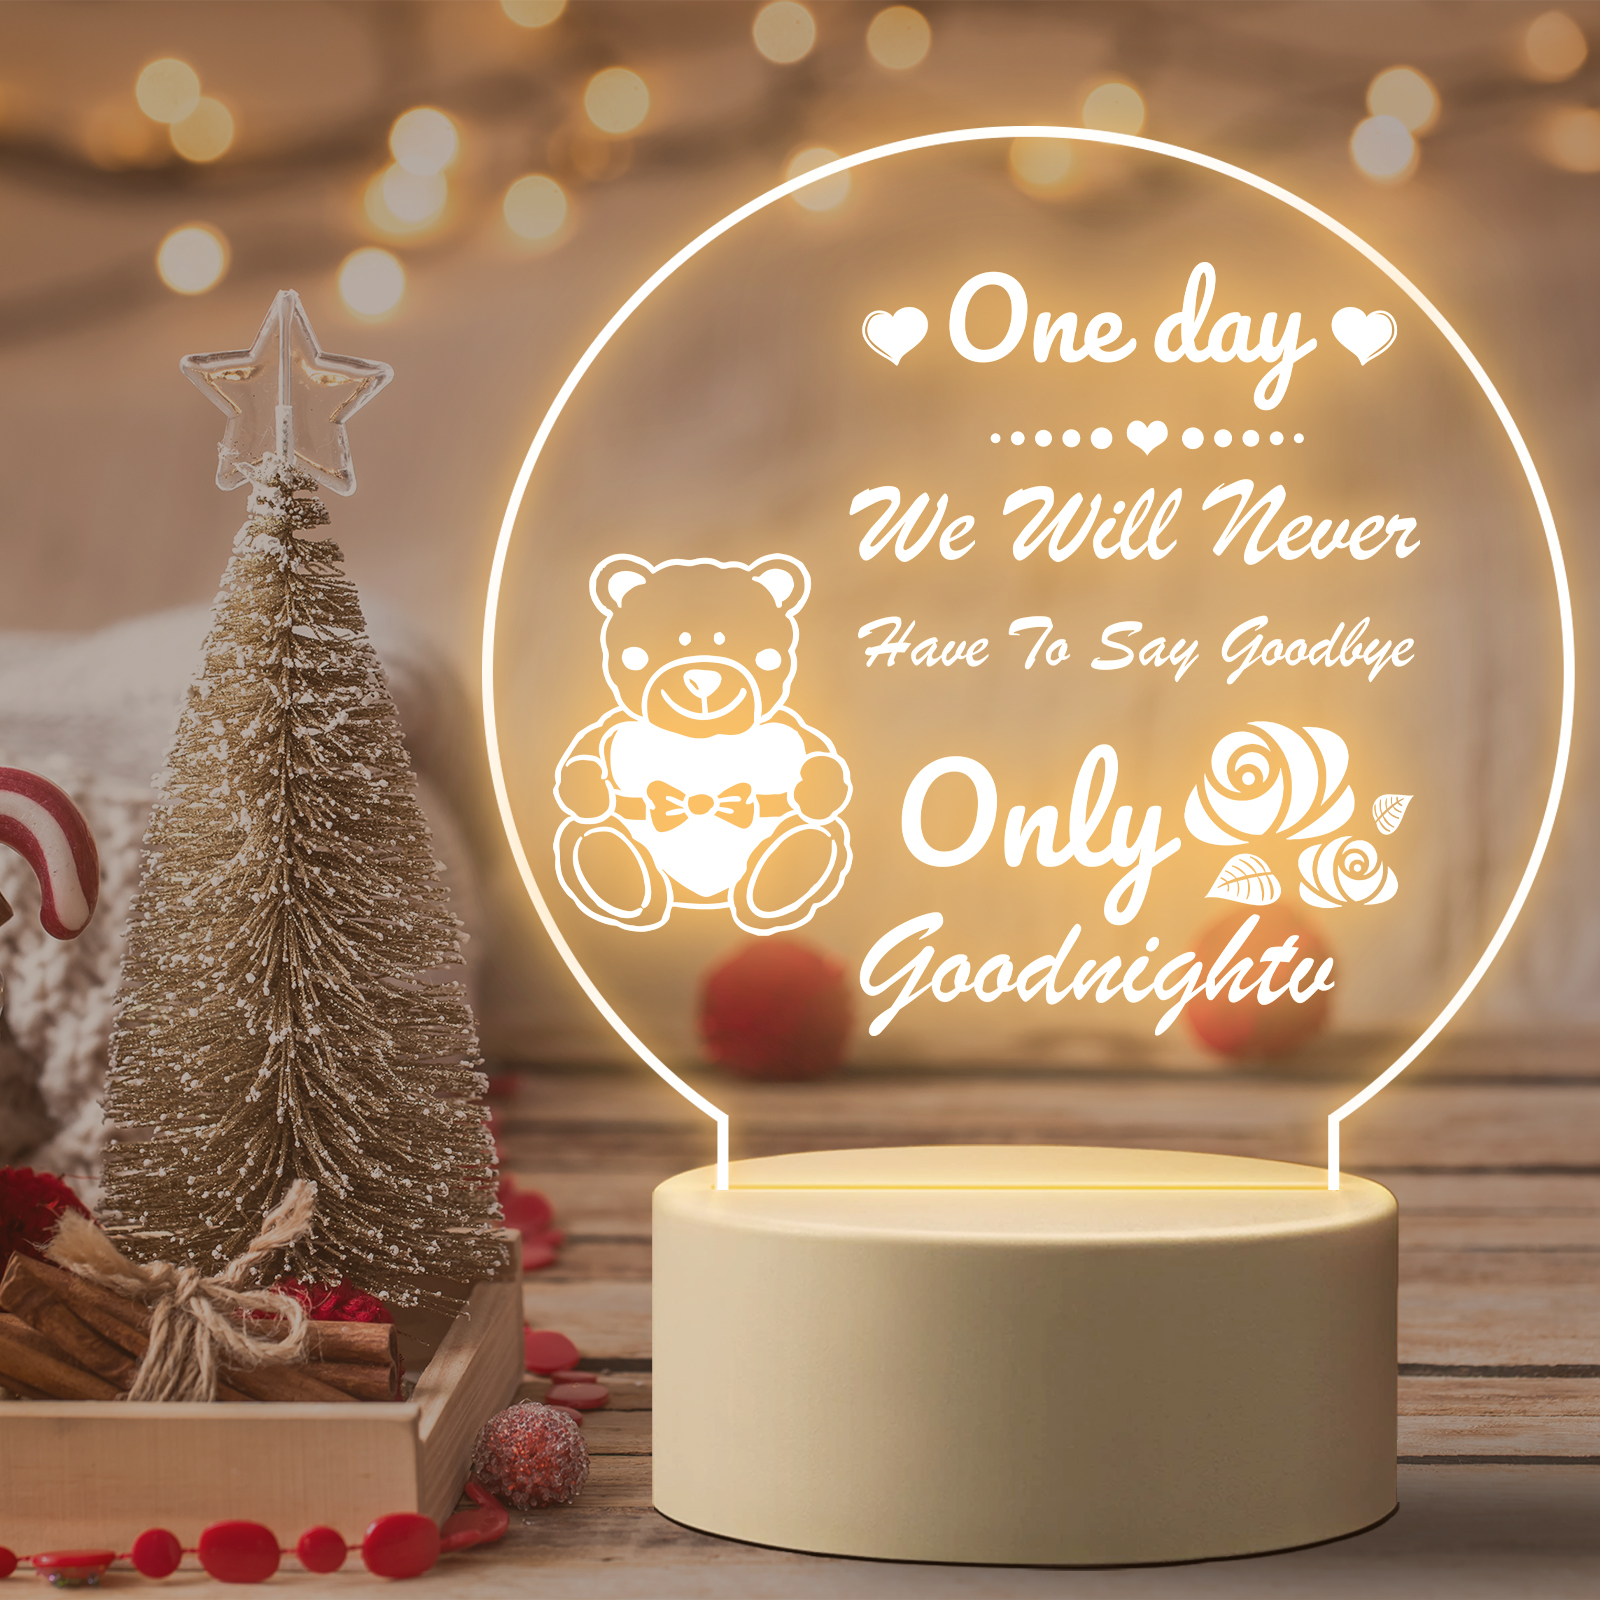 1pc, Cute Gifts For Girlfriends, Girlfriend Birthday Gifts From Boyfriend,  Unique Night Light With Love Quotes, Romantic Girlfriend Gift For Birthday